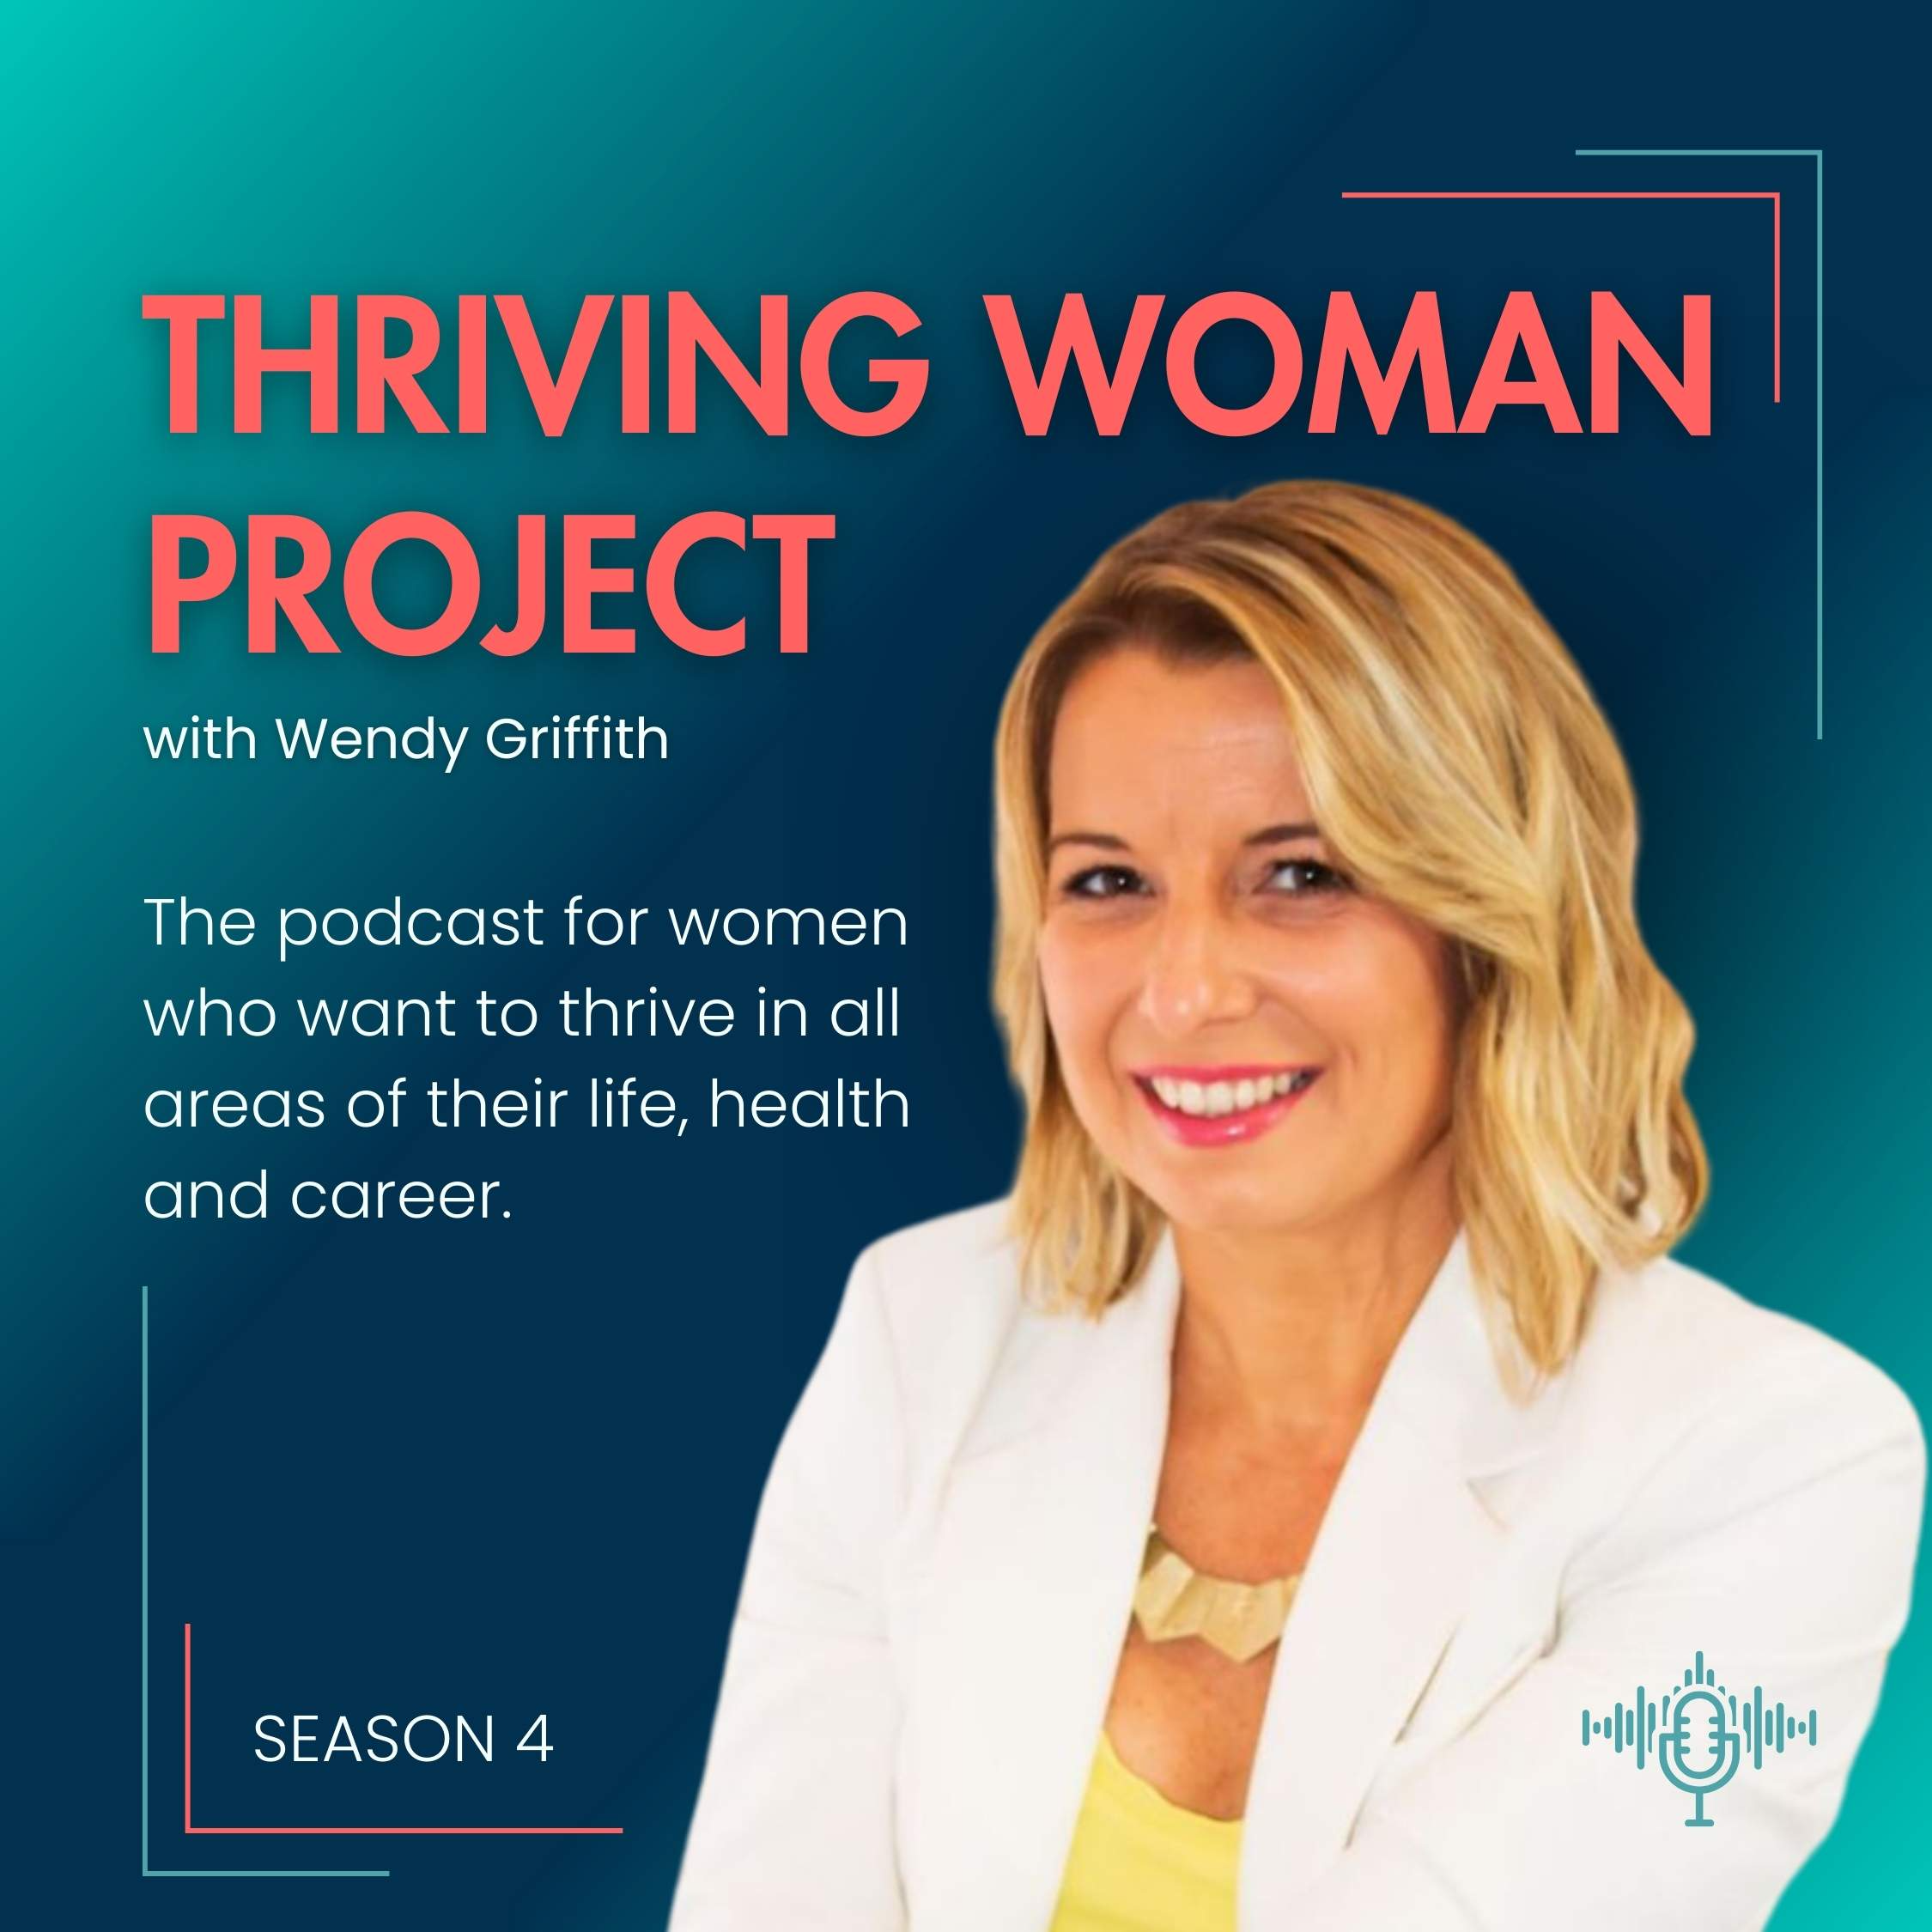 Thriving Woman Project